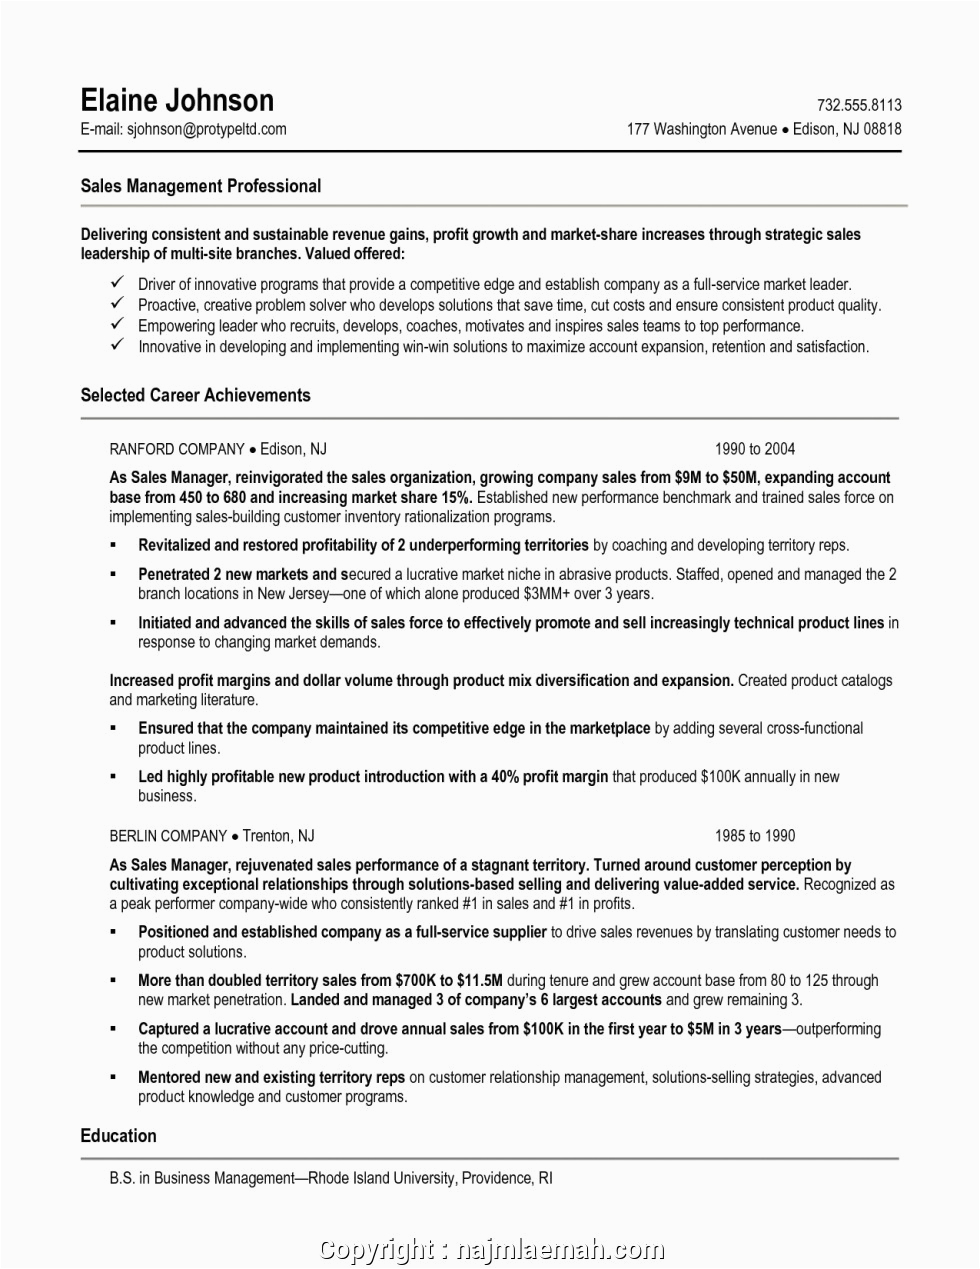 Sample Resume Headline for Sales Manager top Sample Resume for Sales Manager Position Sales Manager